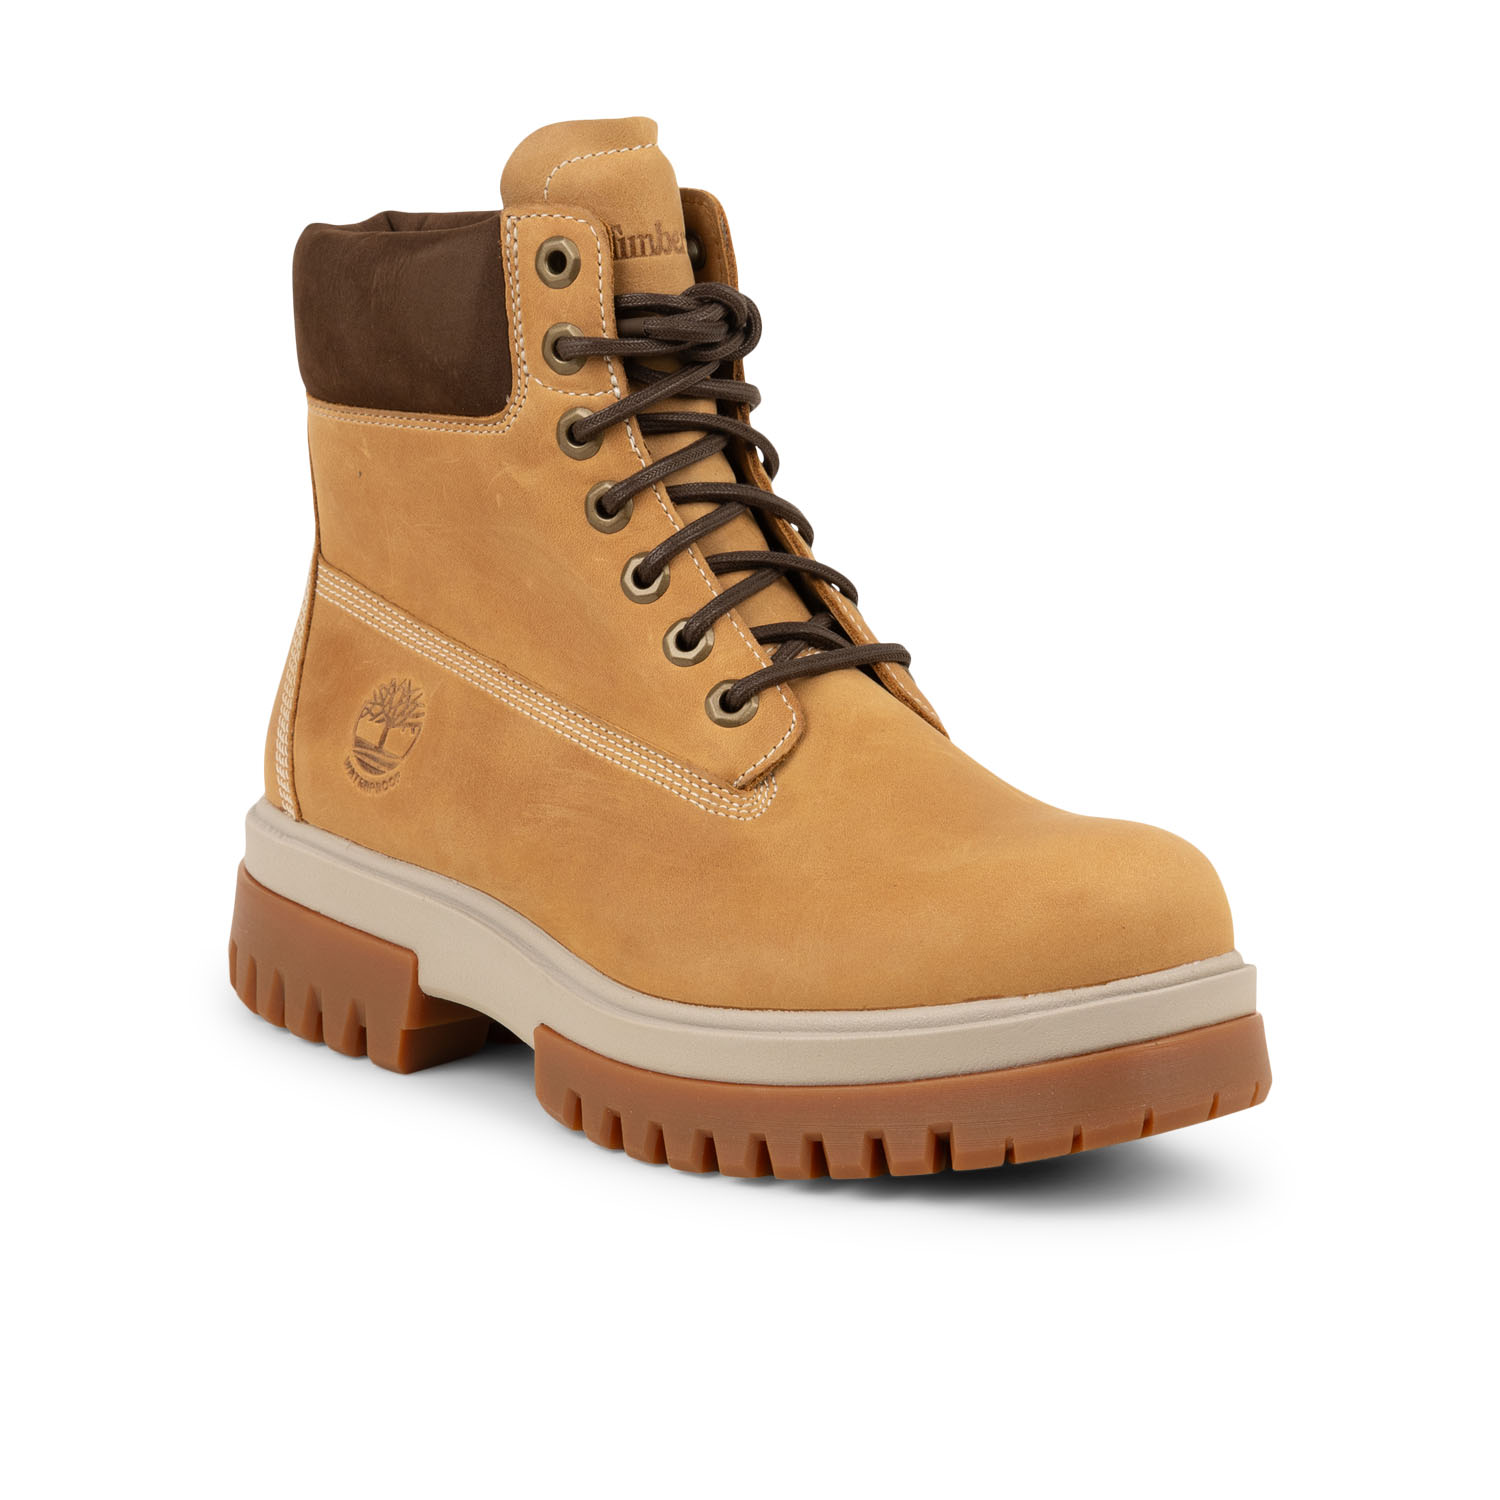 02 - ARBOR ROAD - TIMBERLAND - Boots et bottines - Cuir